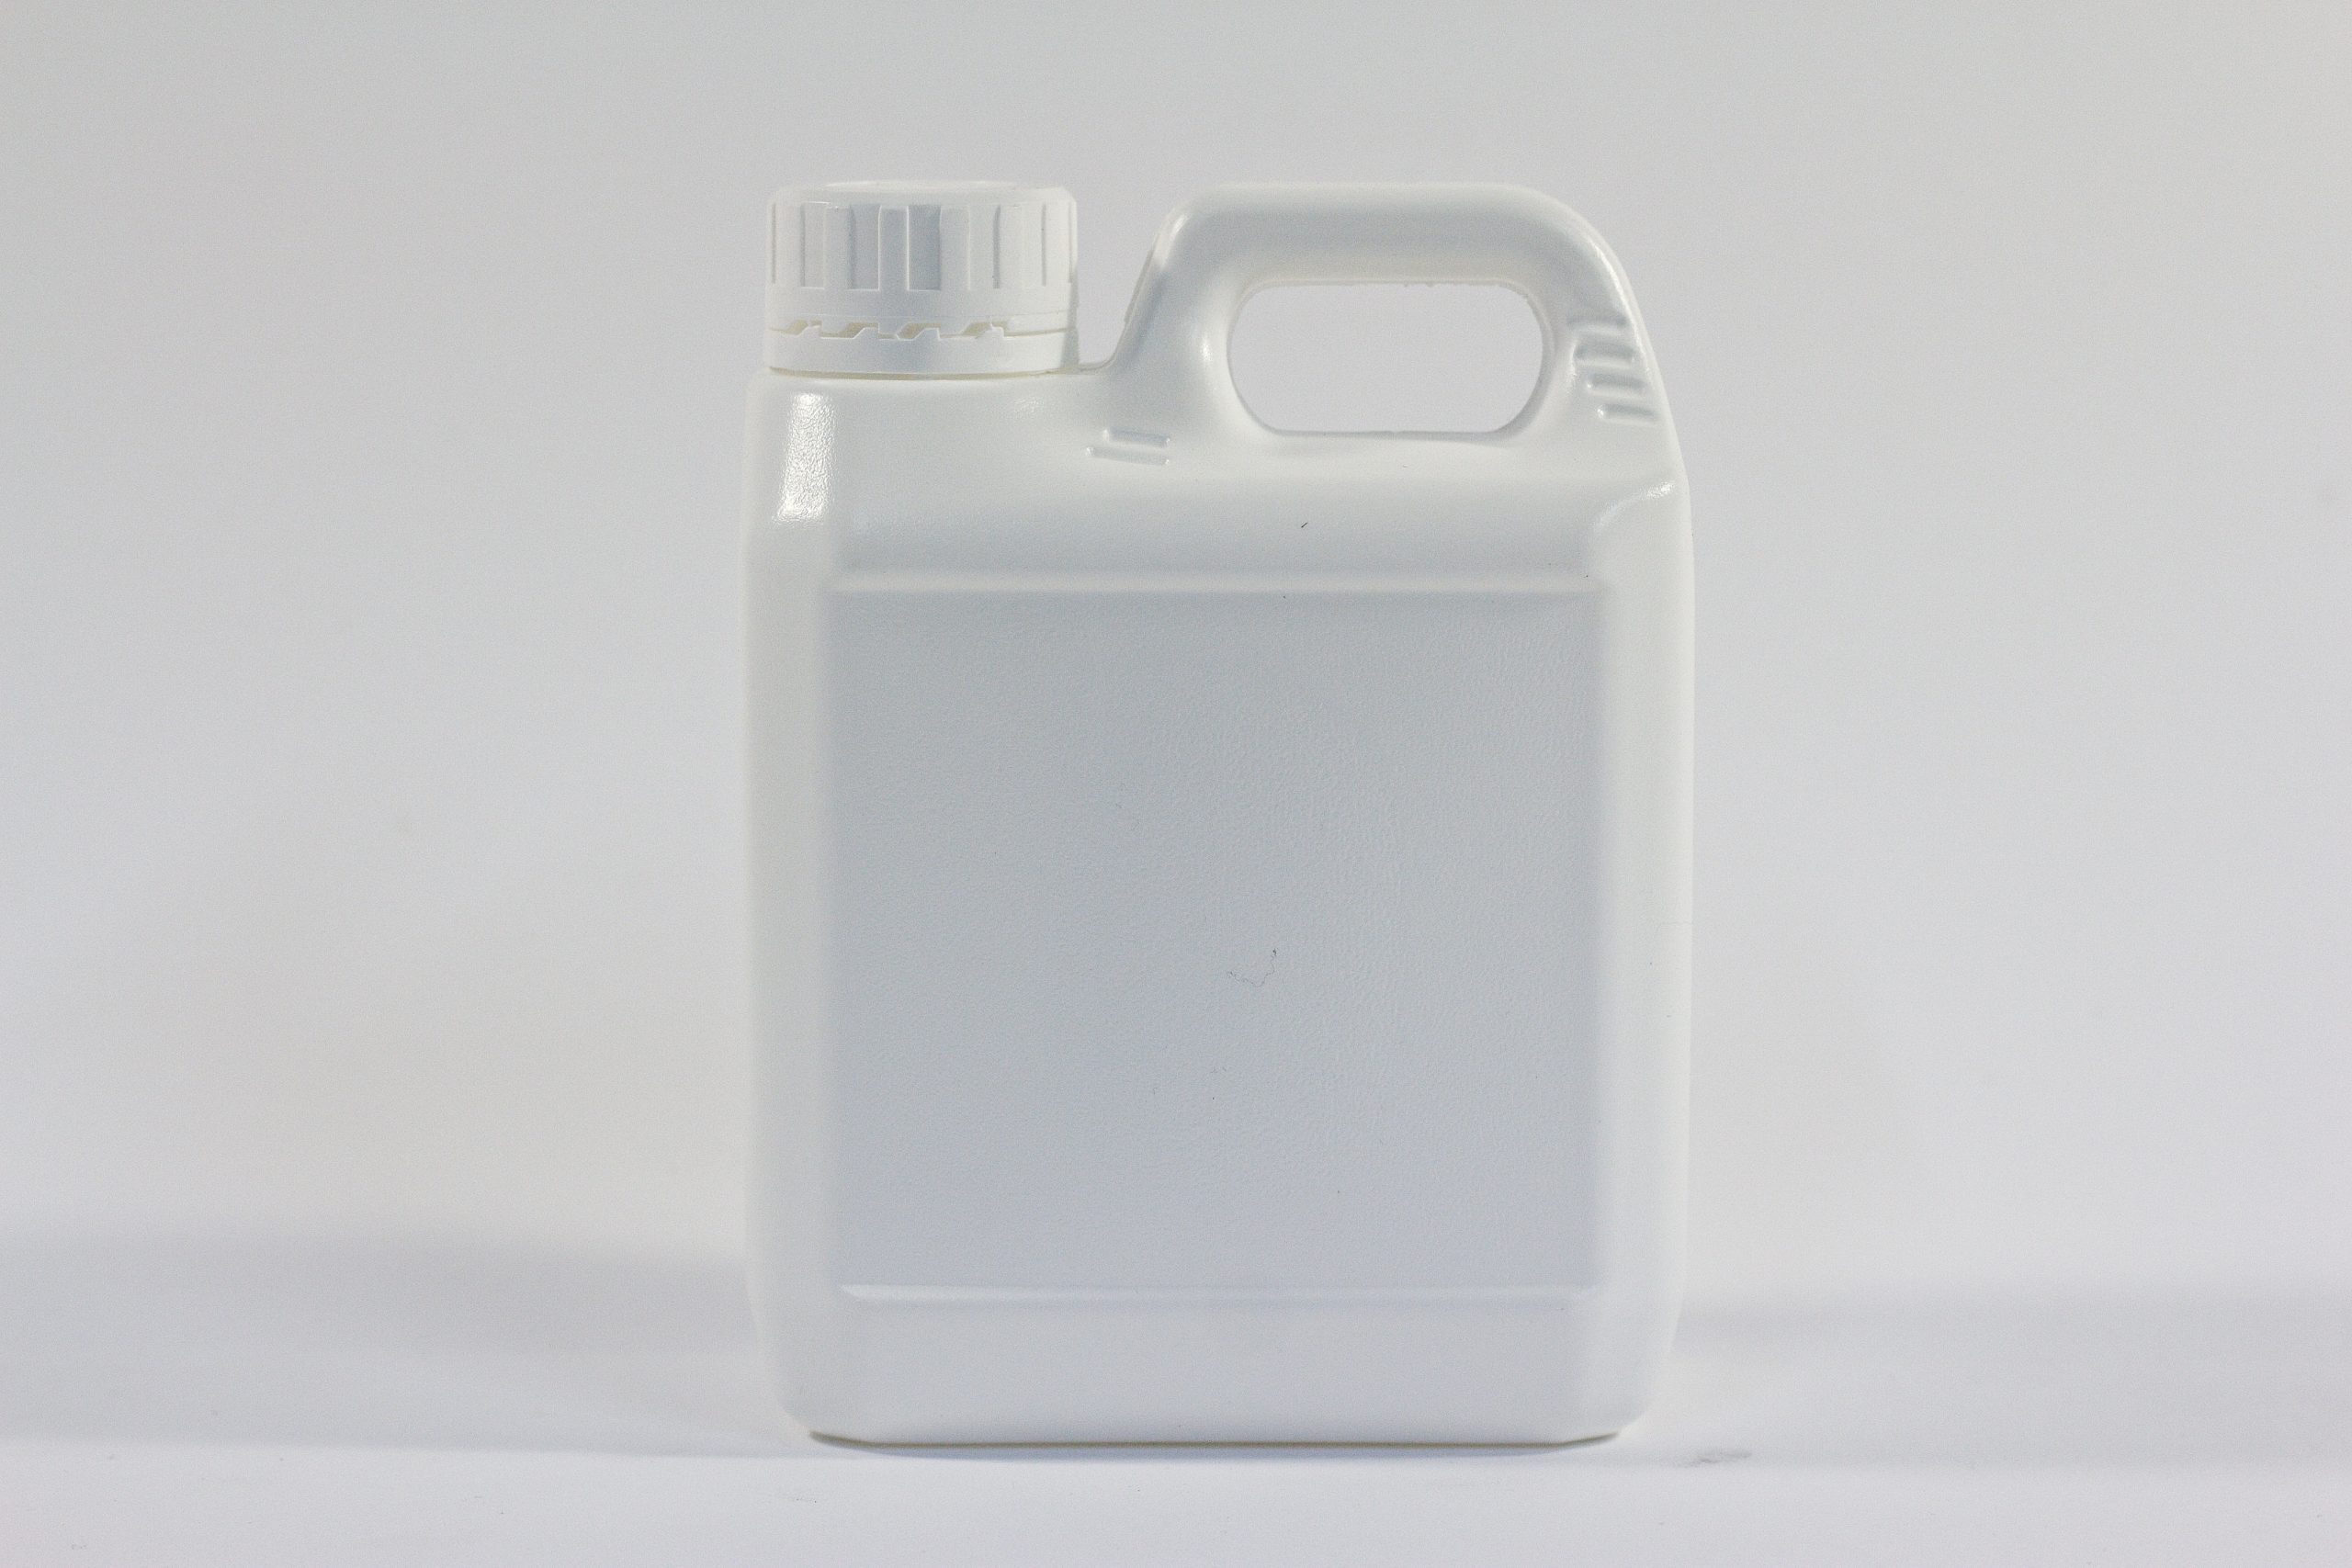 1 litre Plastic jerrycan/drum with tamper evident lid and built in handle. Food grade packaging perfect for water sampling, oils, chemicals and industrial use. From our Plastic Packaging range.